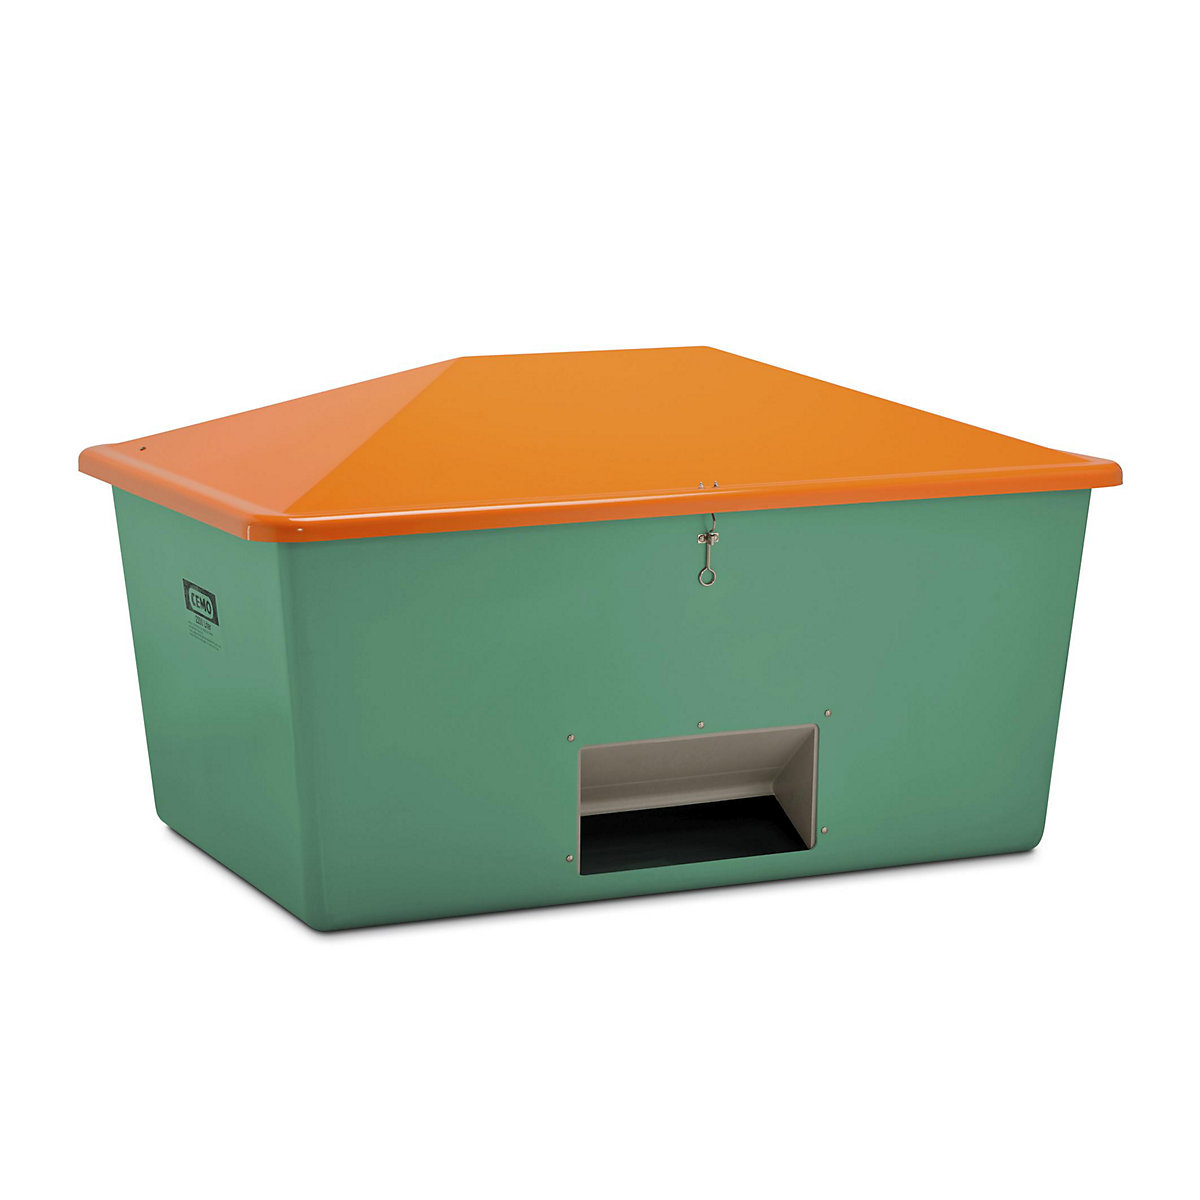 Grit container made of GRP – CEMO, capacity 2200 l, with dispenser opening, green container-4